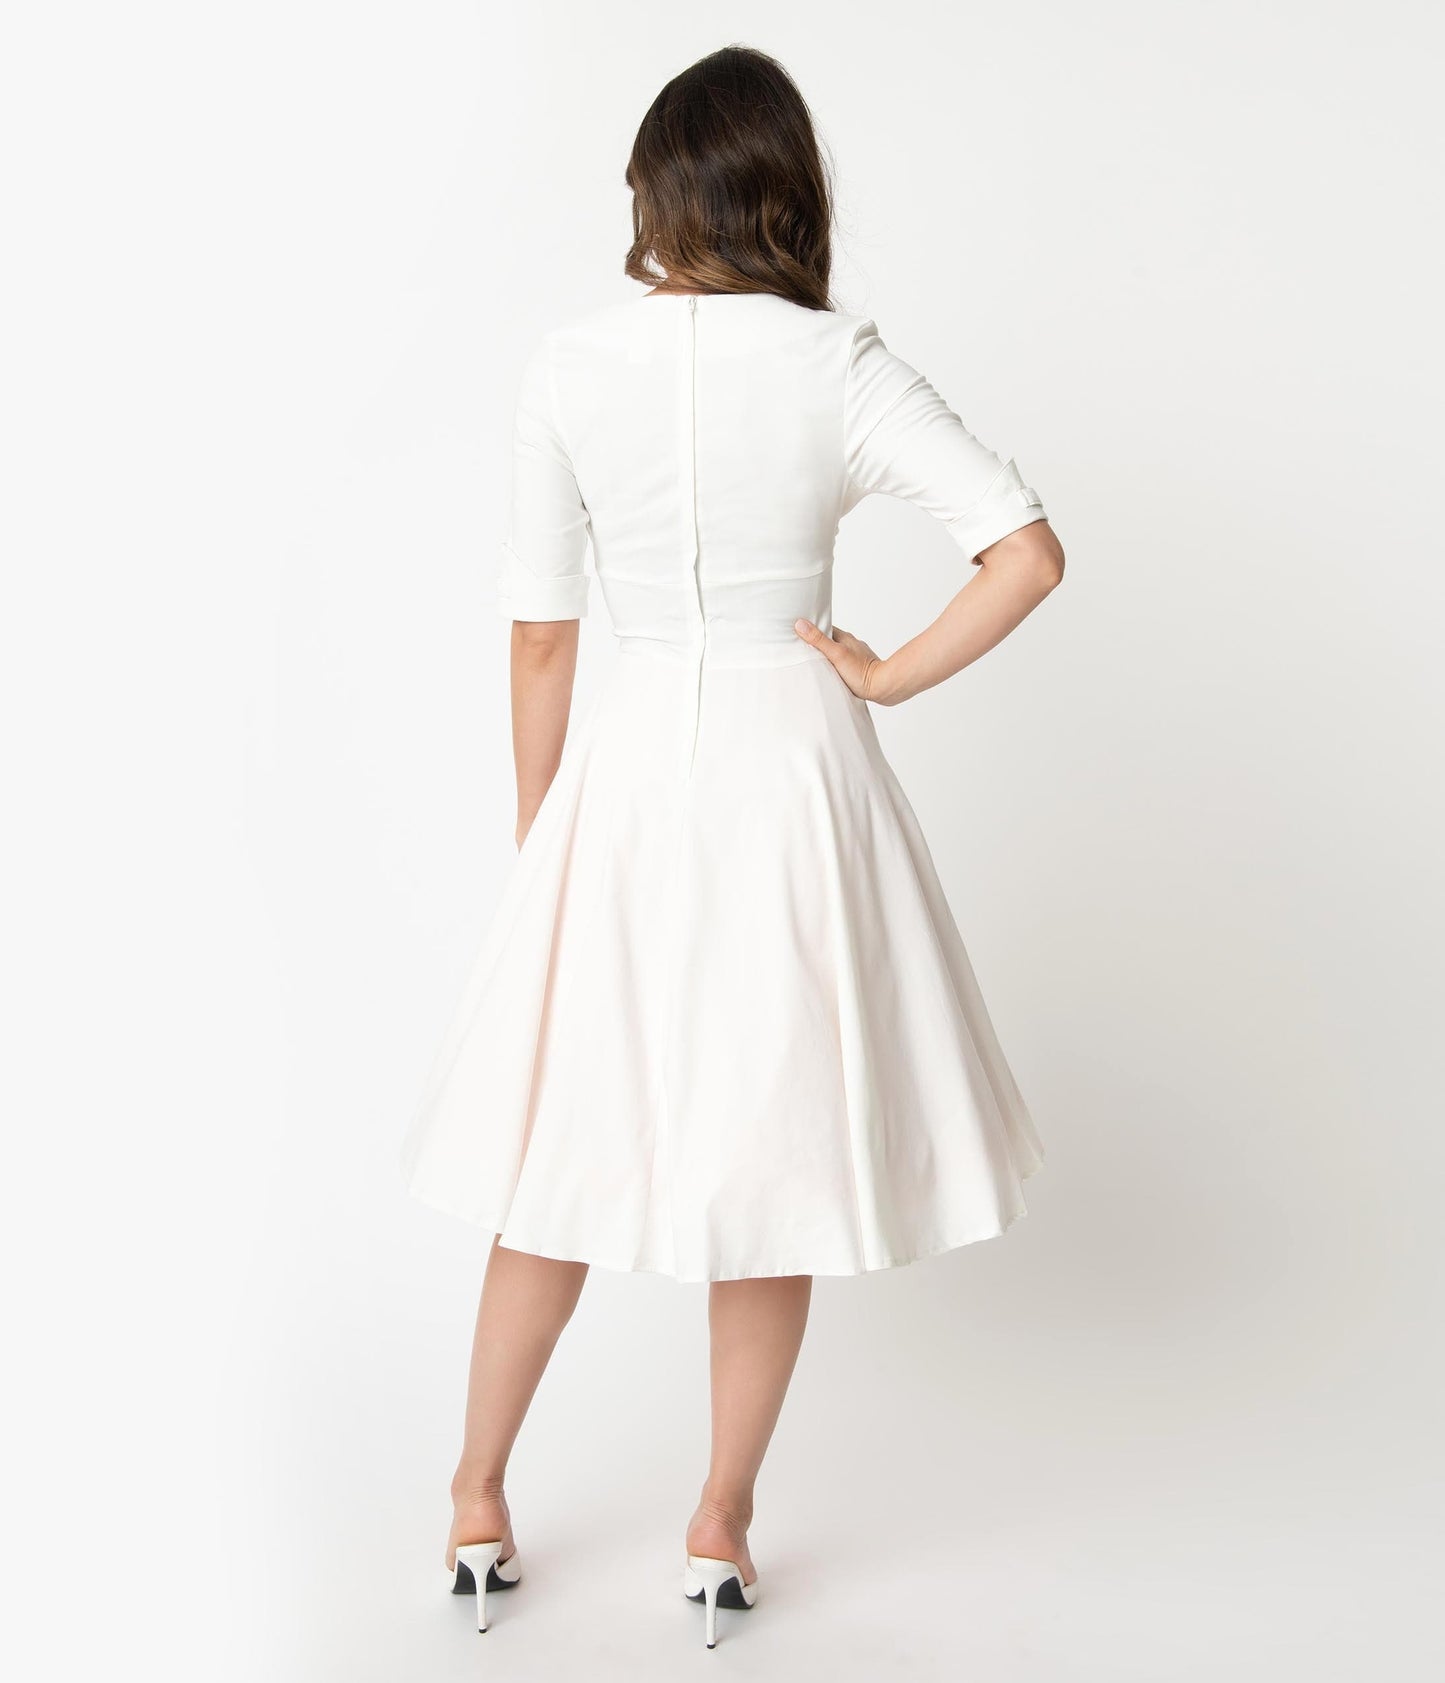 Unique Vintage Ivory Delores Swing Dress with Sleeves - Unique Vintage - Womens, DRESSES, SWING